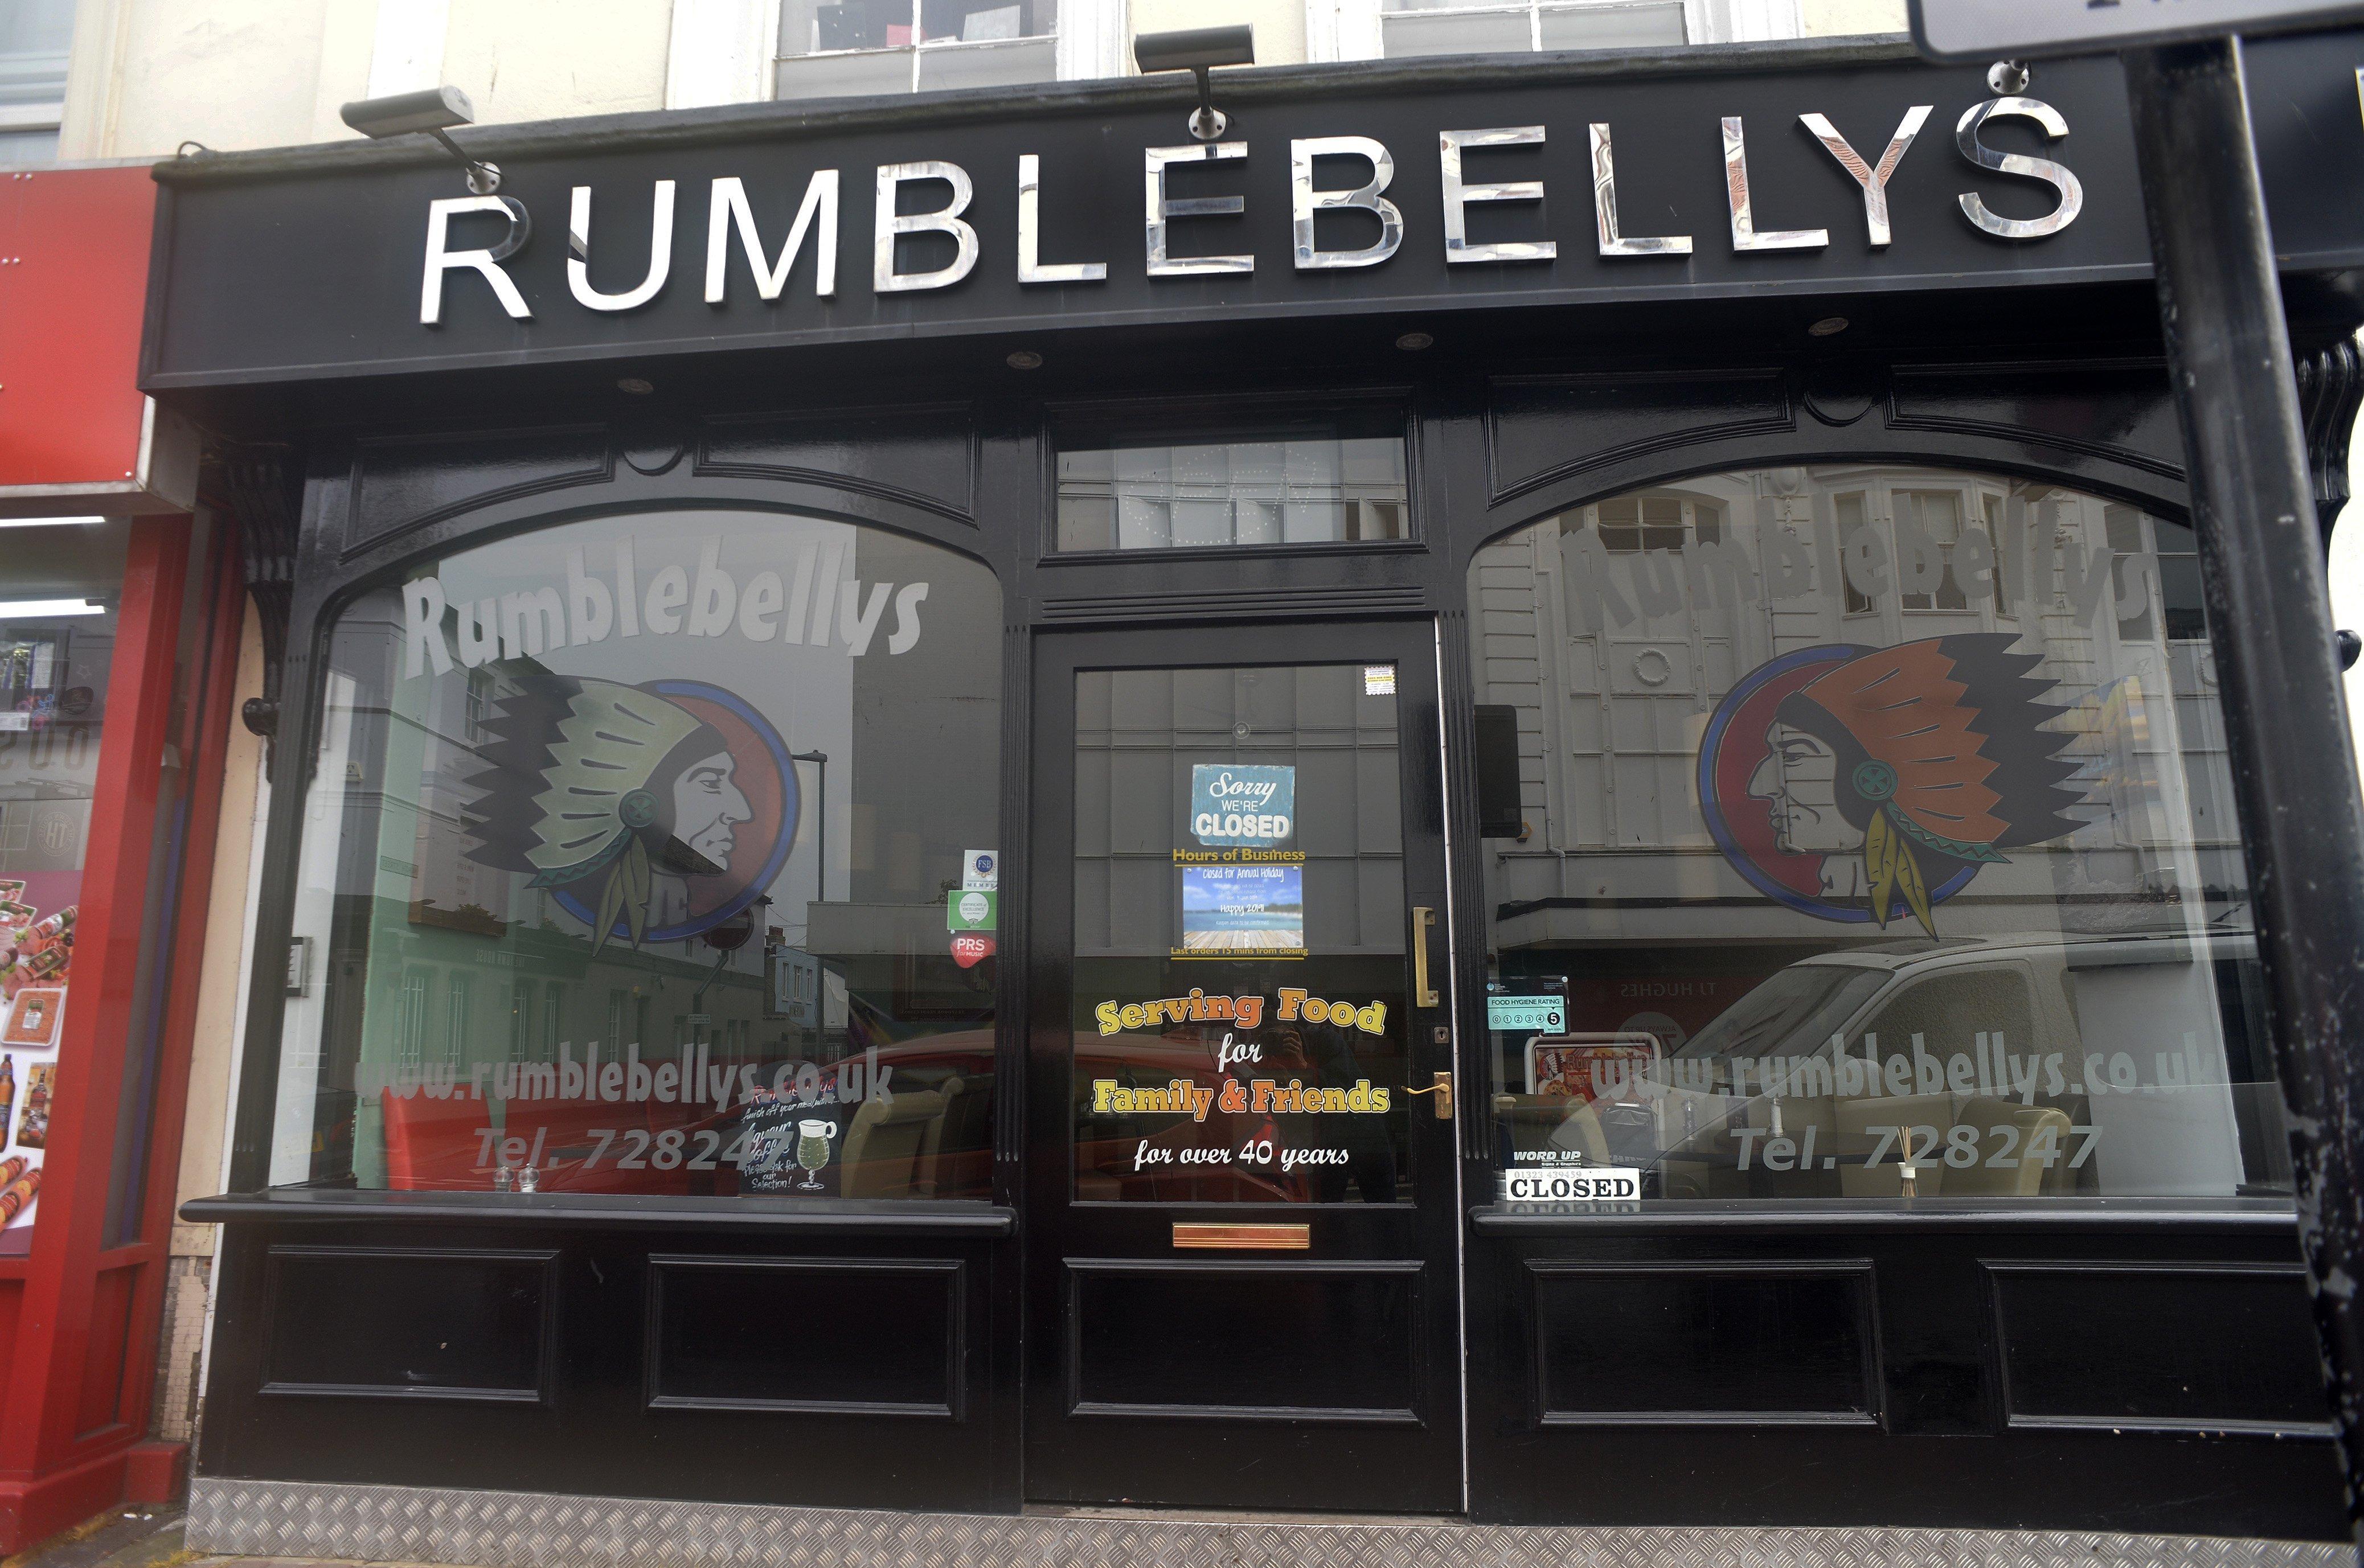 Family business Rumblebellys in Seaside Road closed this year after 40 years (Photo by Jon Rigby)